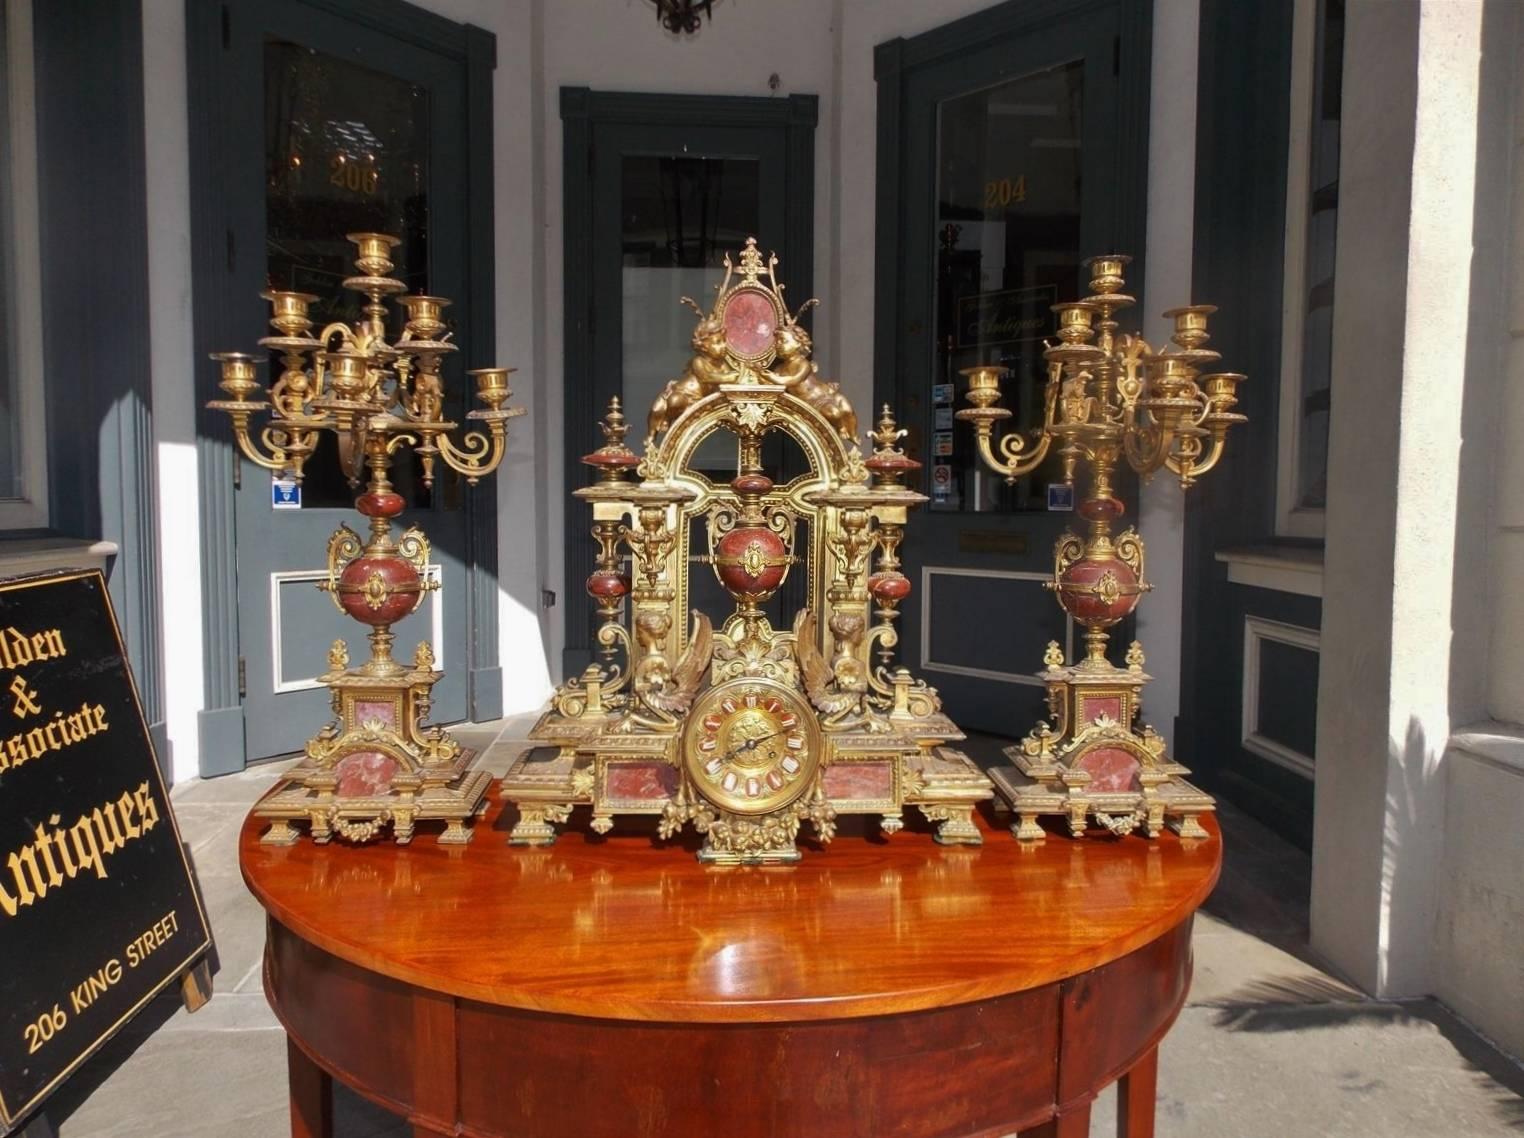 French gilt bronze and marble three piece mantel clock flanked by matching candelabras. Center clock has cherub, griffon, and floral fruit motif. Clock is in working condition.